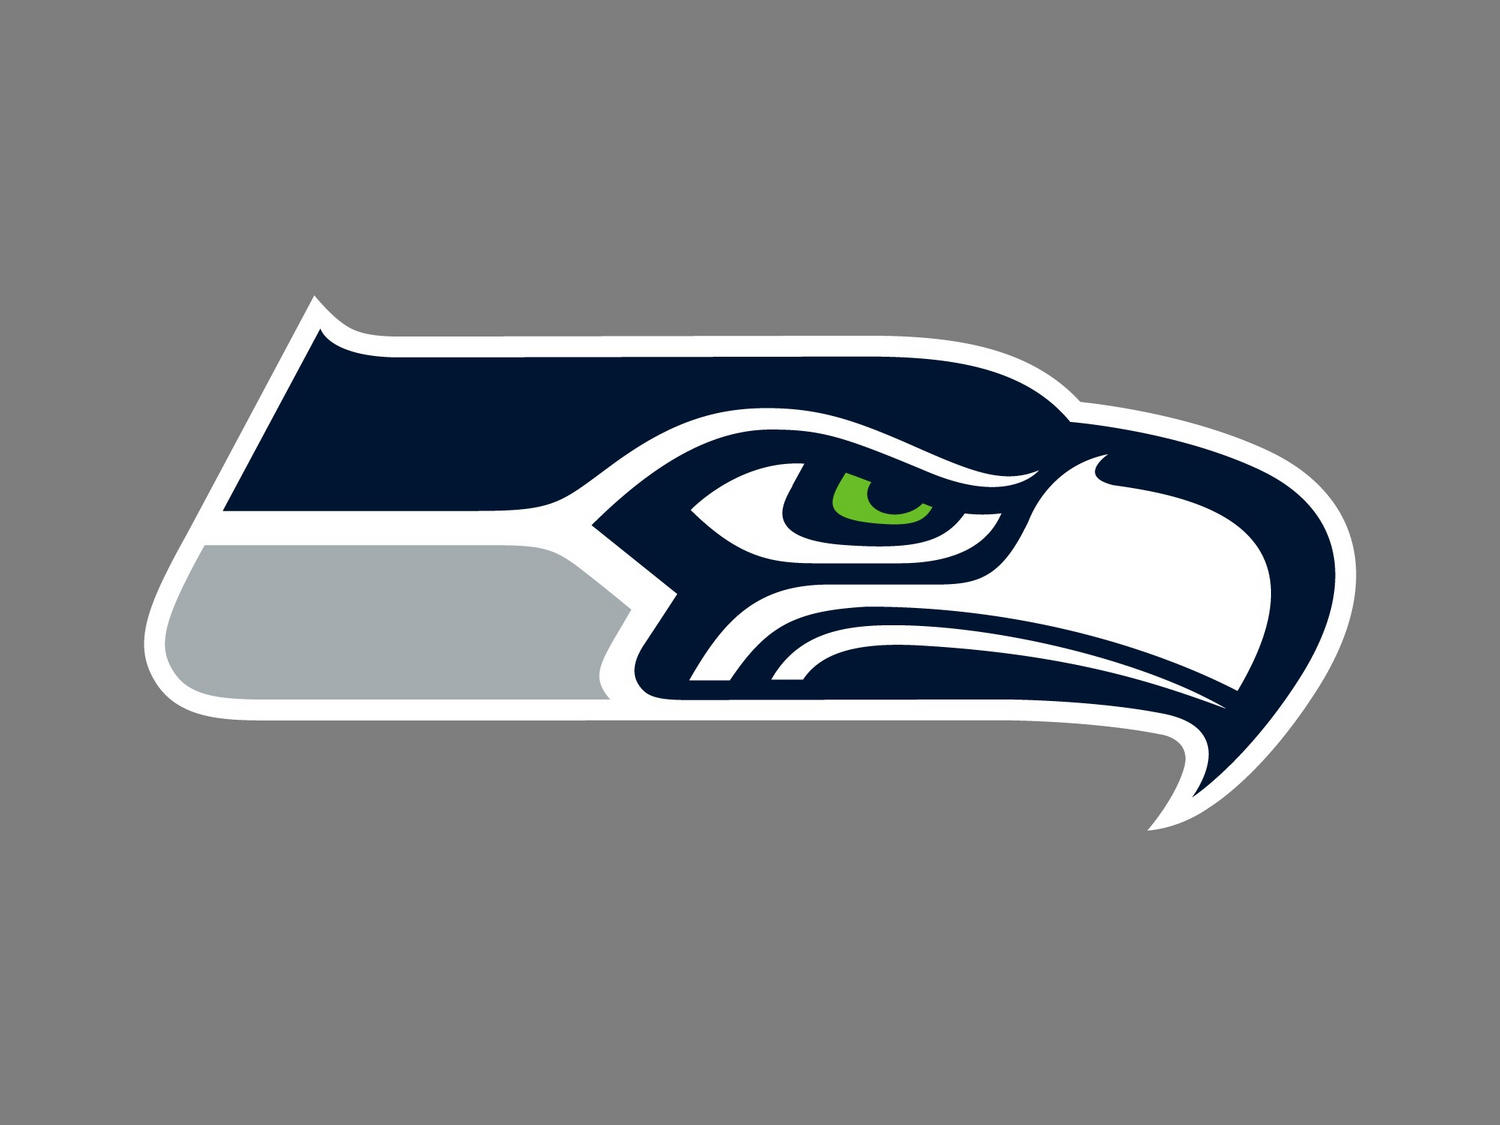 Seattle Seahawks '12 Tour' coming to Boise